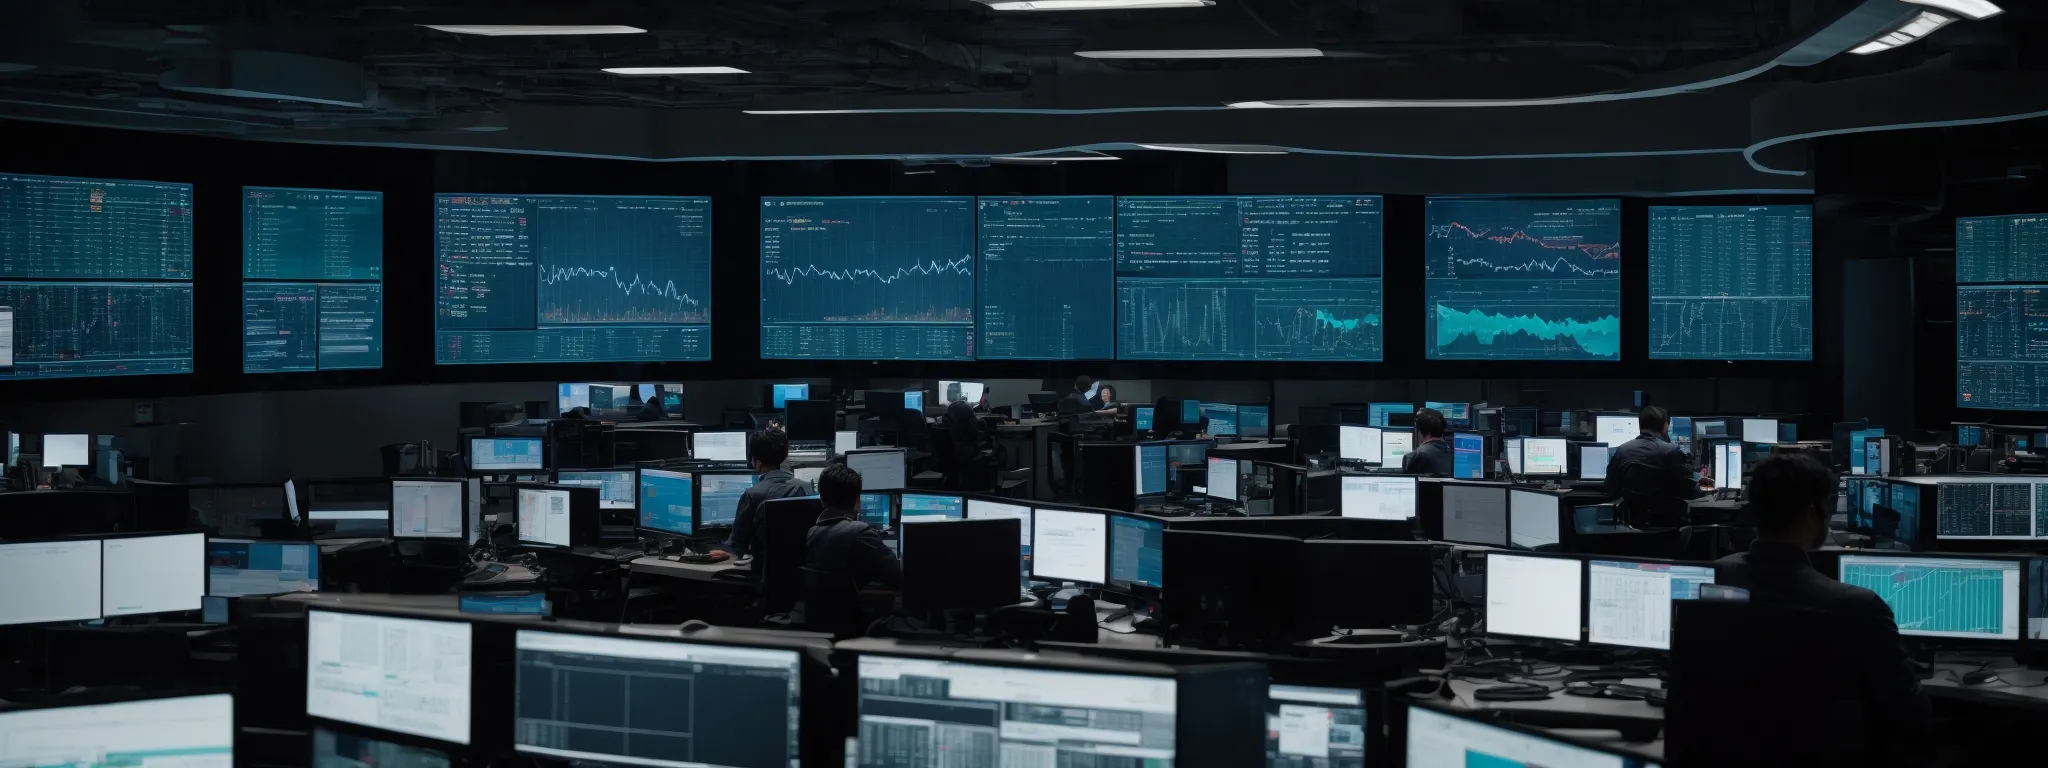 a network operations center with large screens displaying live data analysis amidst a team working at computer stations.